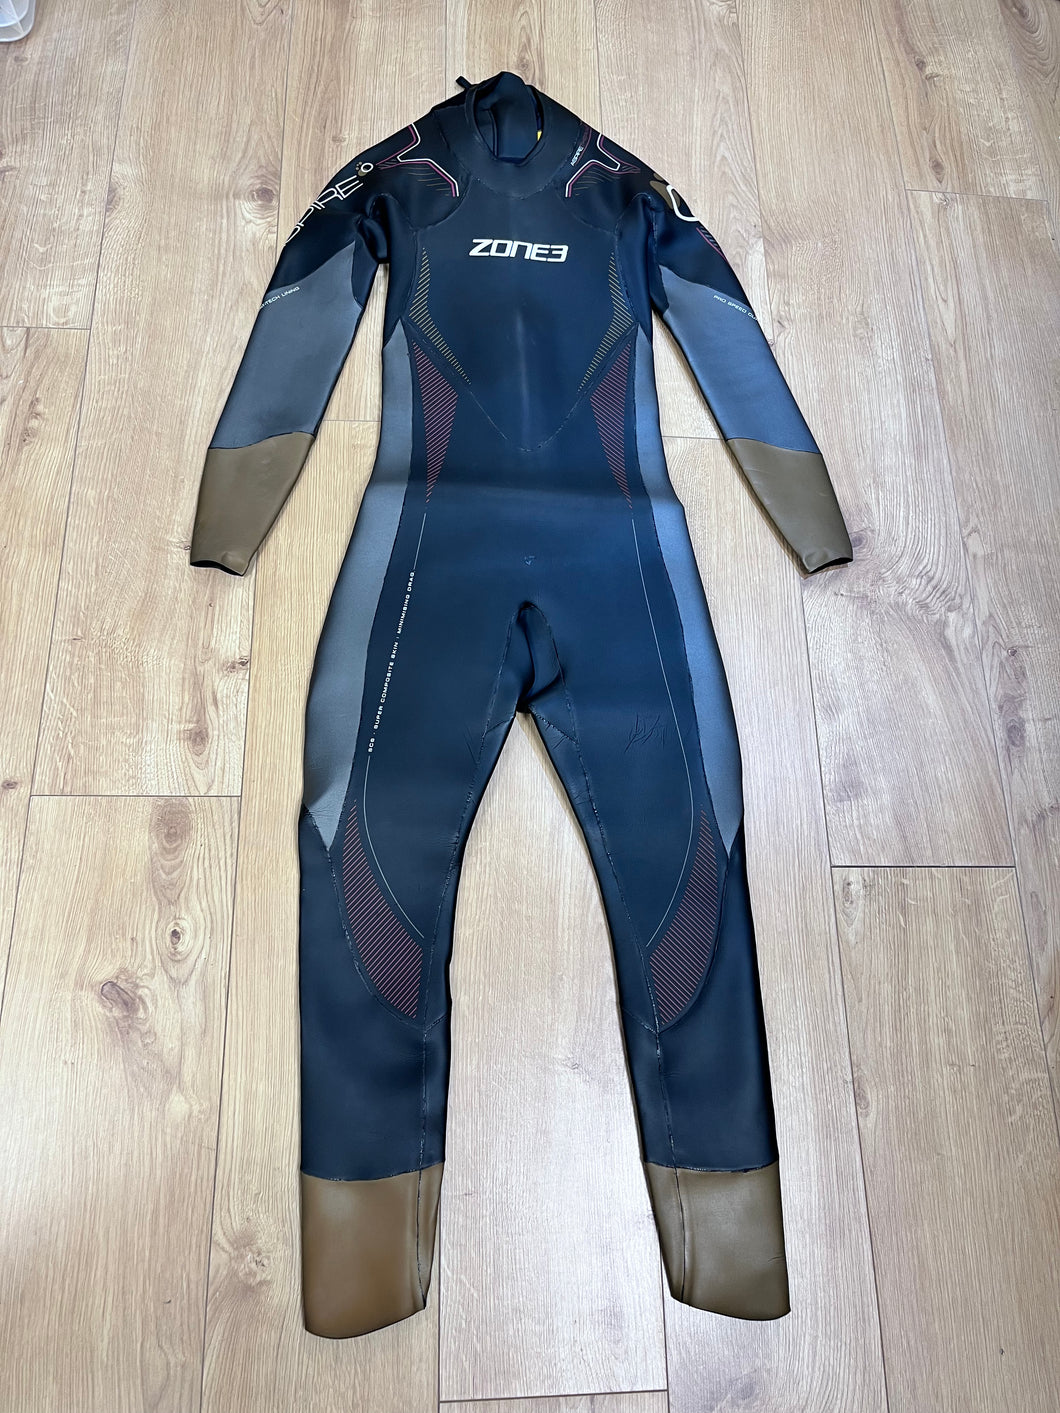 Pre Loved Zone 3 Thermal Aspire Mens Wetsuit M (653) - Grade A